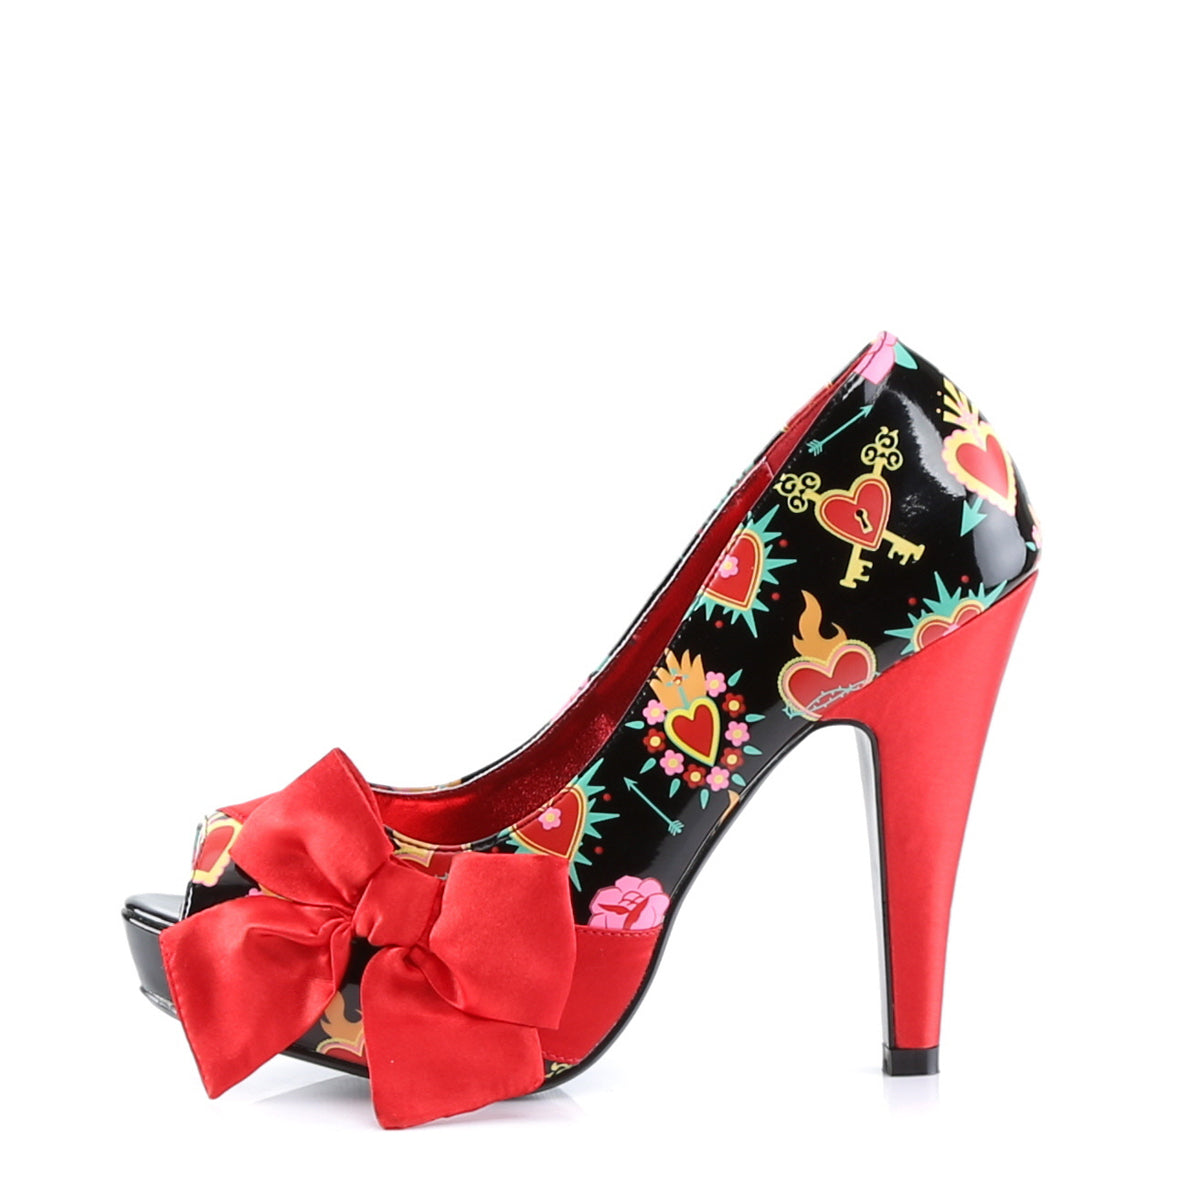 BETTIE-13 Retro Glamour Pin Up Couture Platforms Blk Pat-Red Satin (Sacred Hearts)